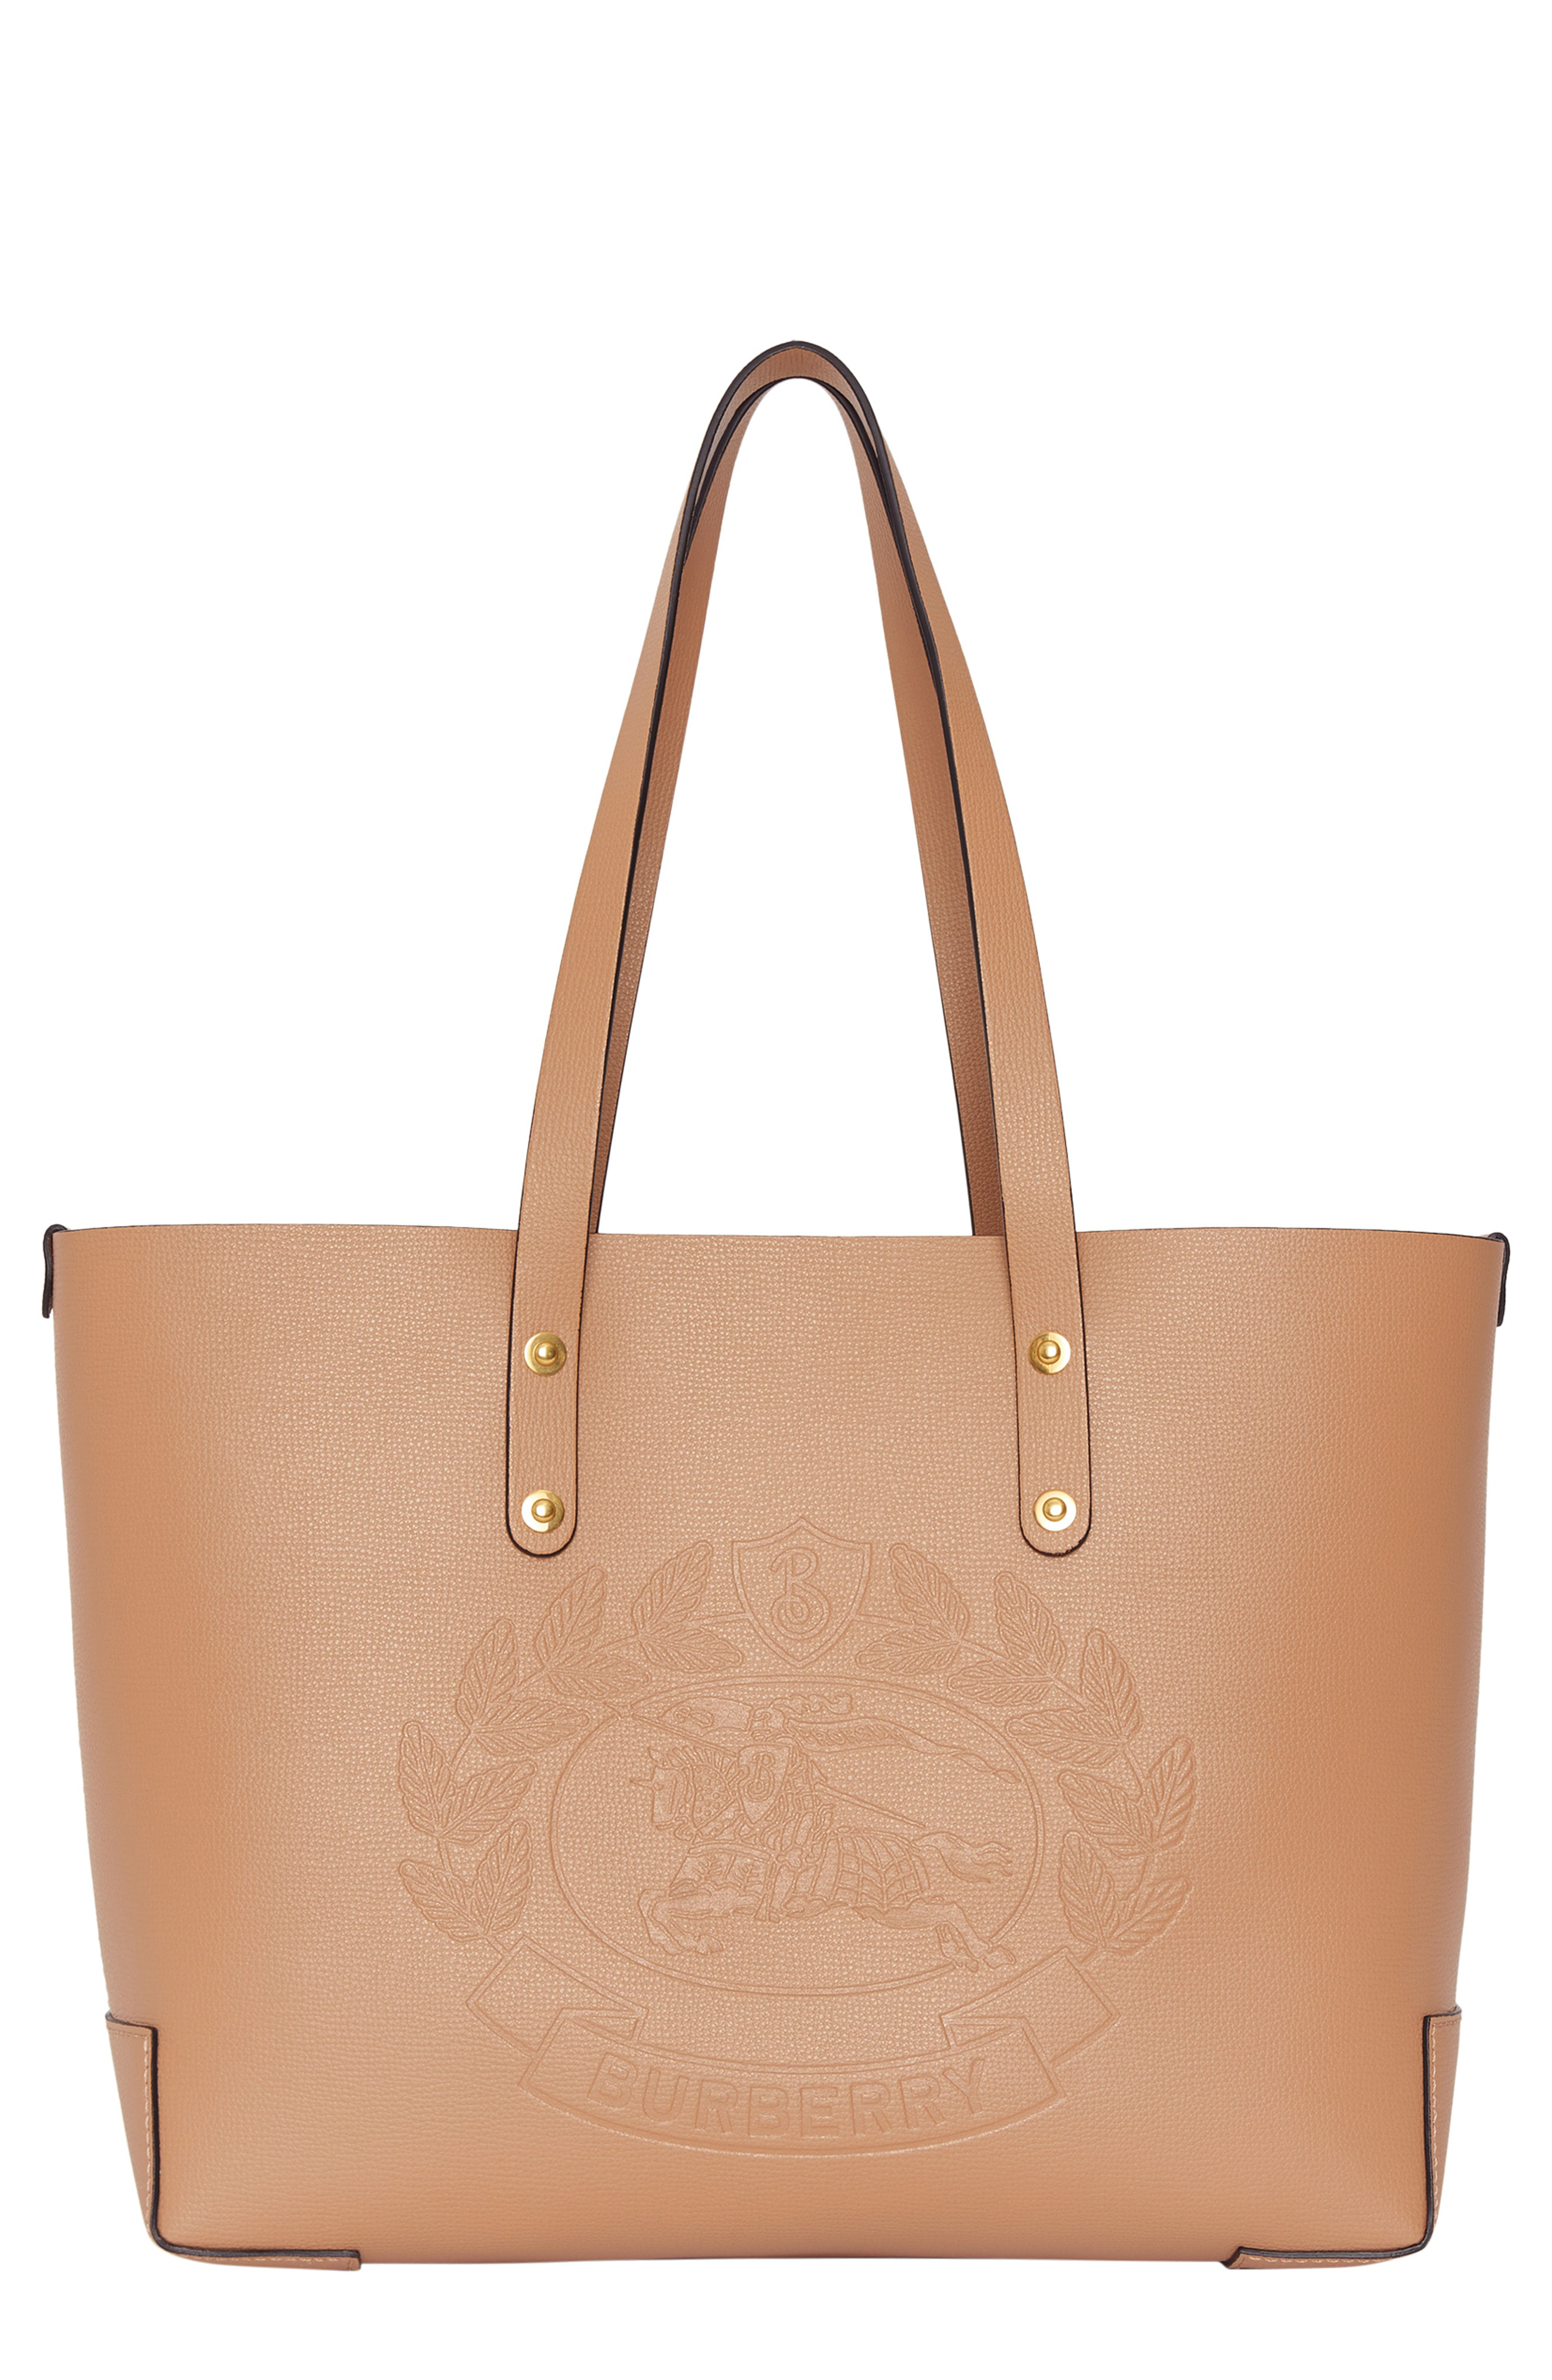 burberry crest small leather tote bag